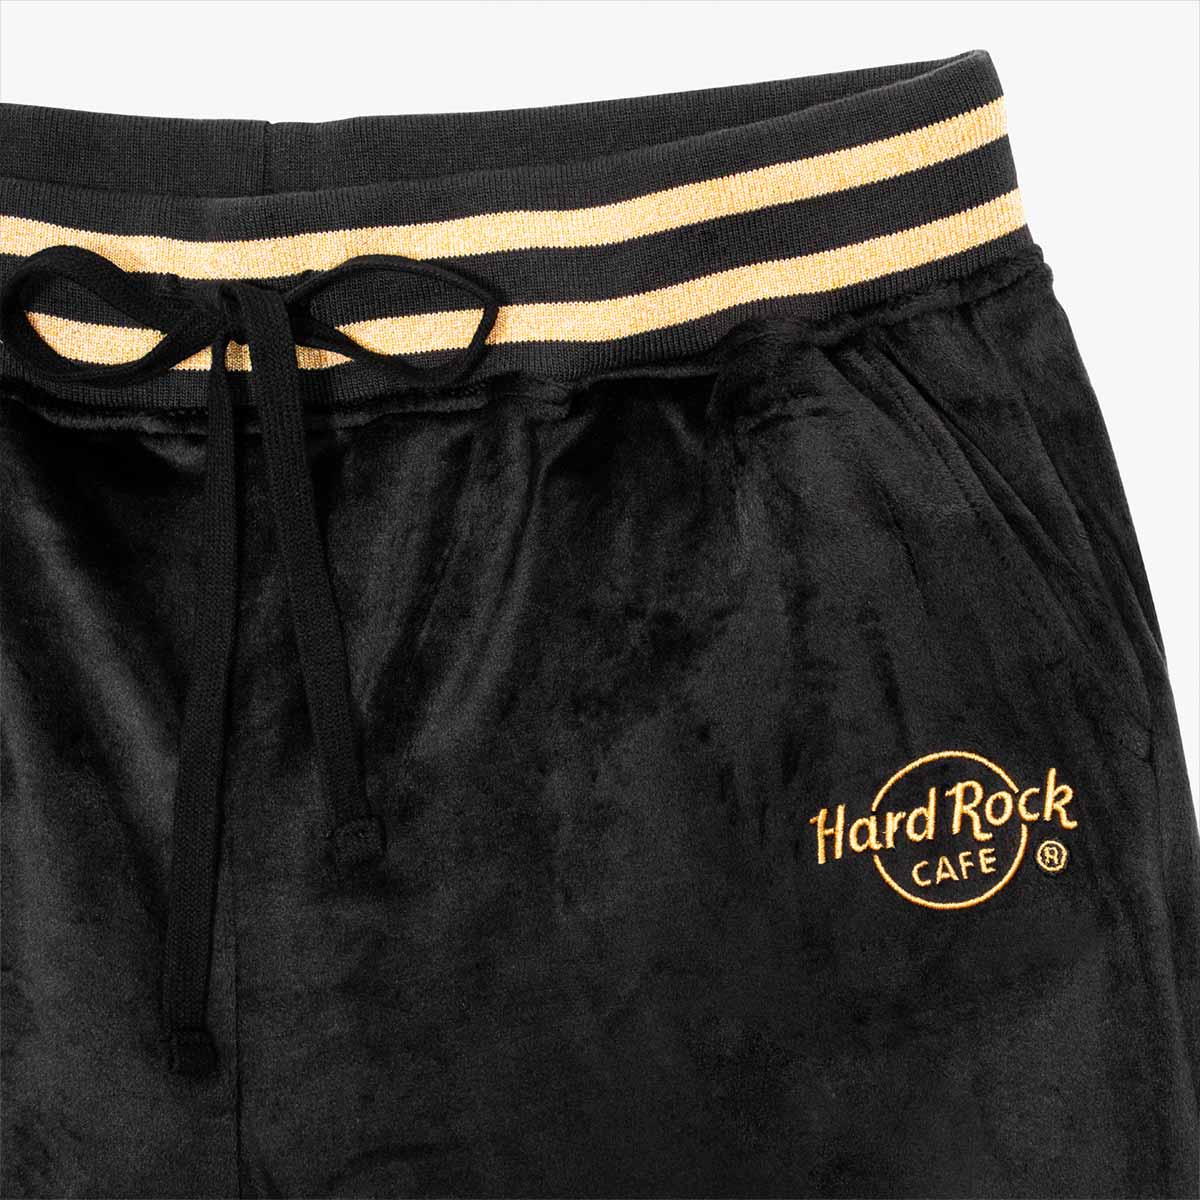 Velour Black and Metallic Gold Joggers by Hard Rock image number 3